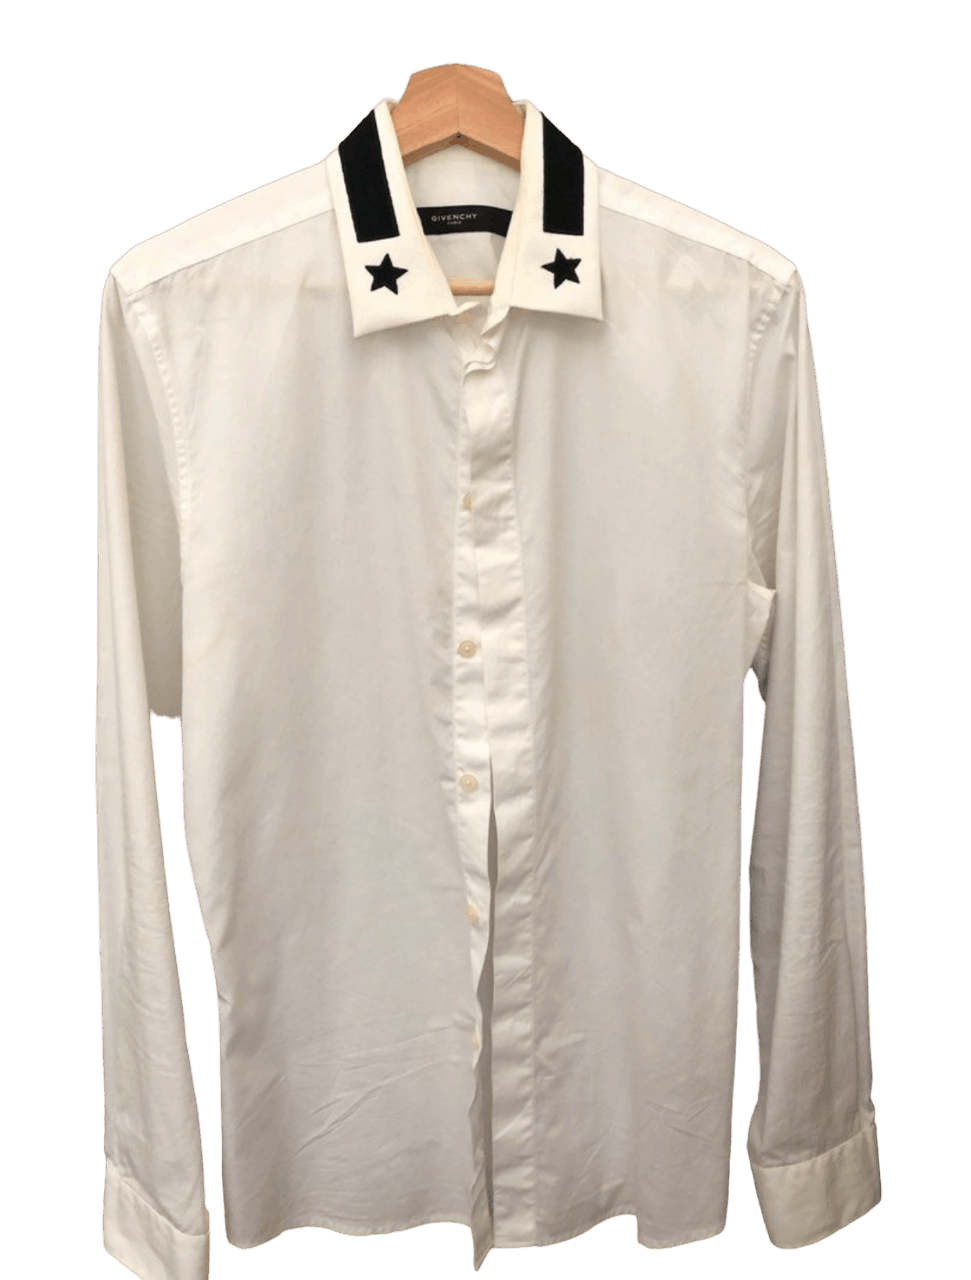 Givenchy Givenchy Star Button Down | Grailed